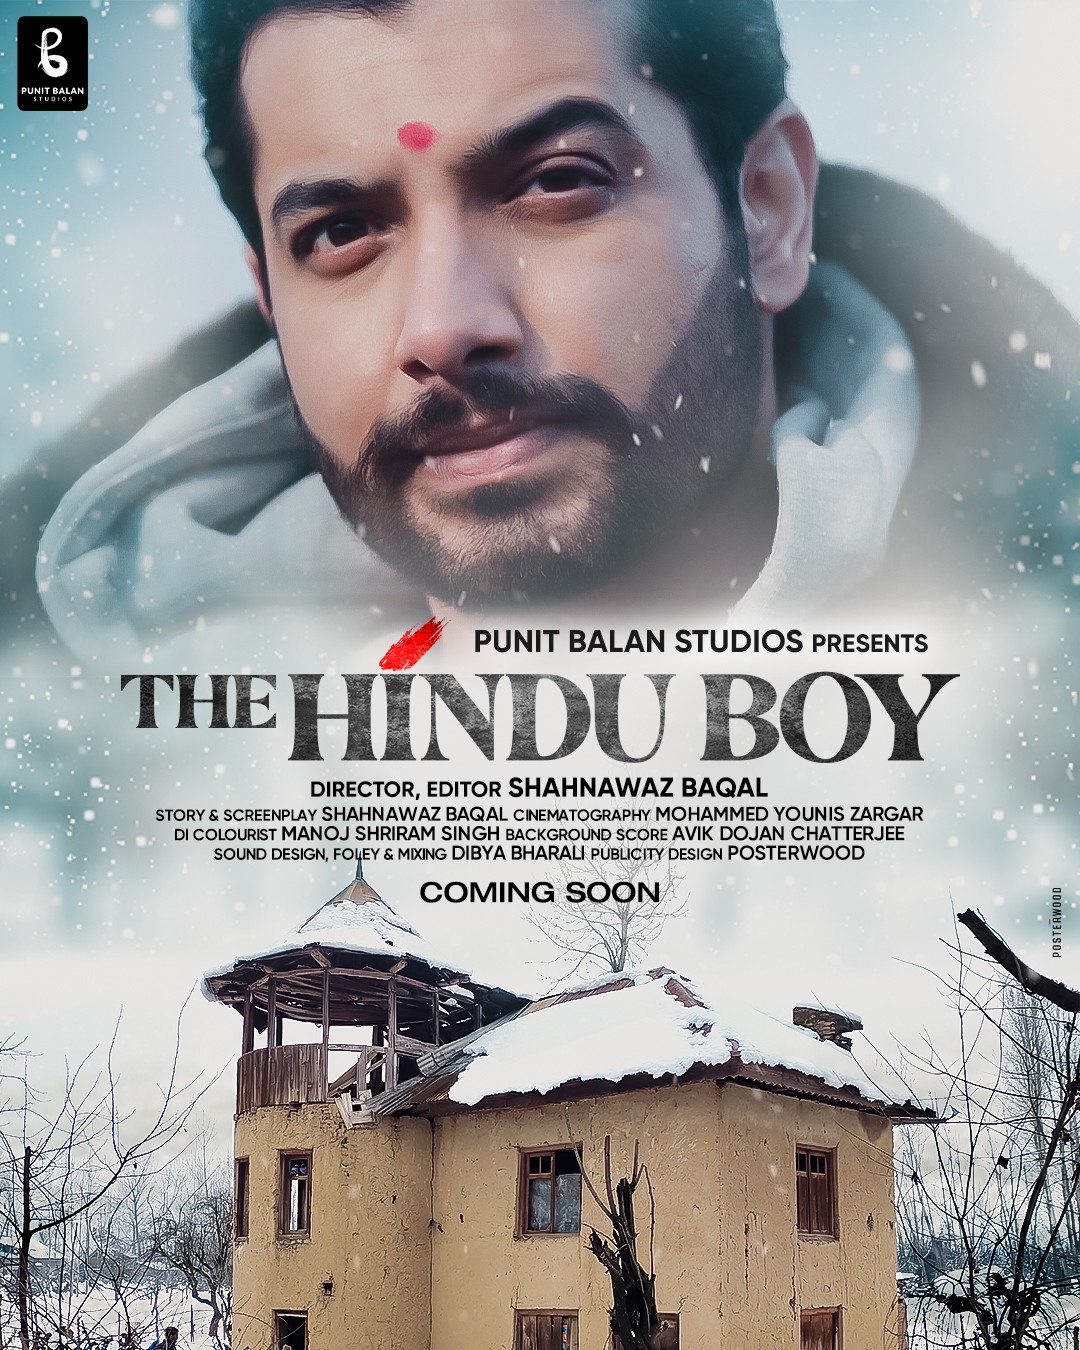 Extra Large Movie Poster Image for The Hindu Boy